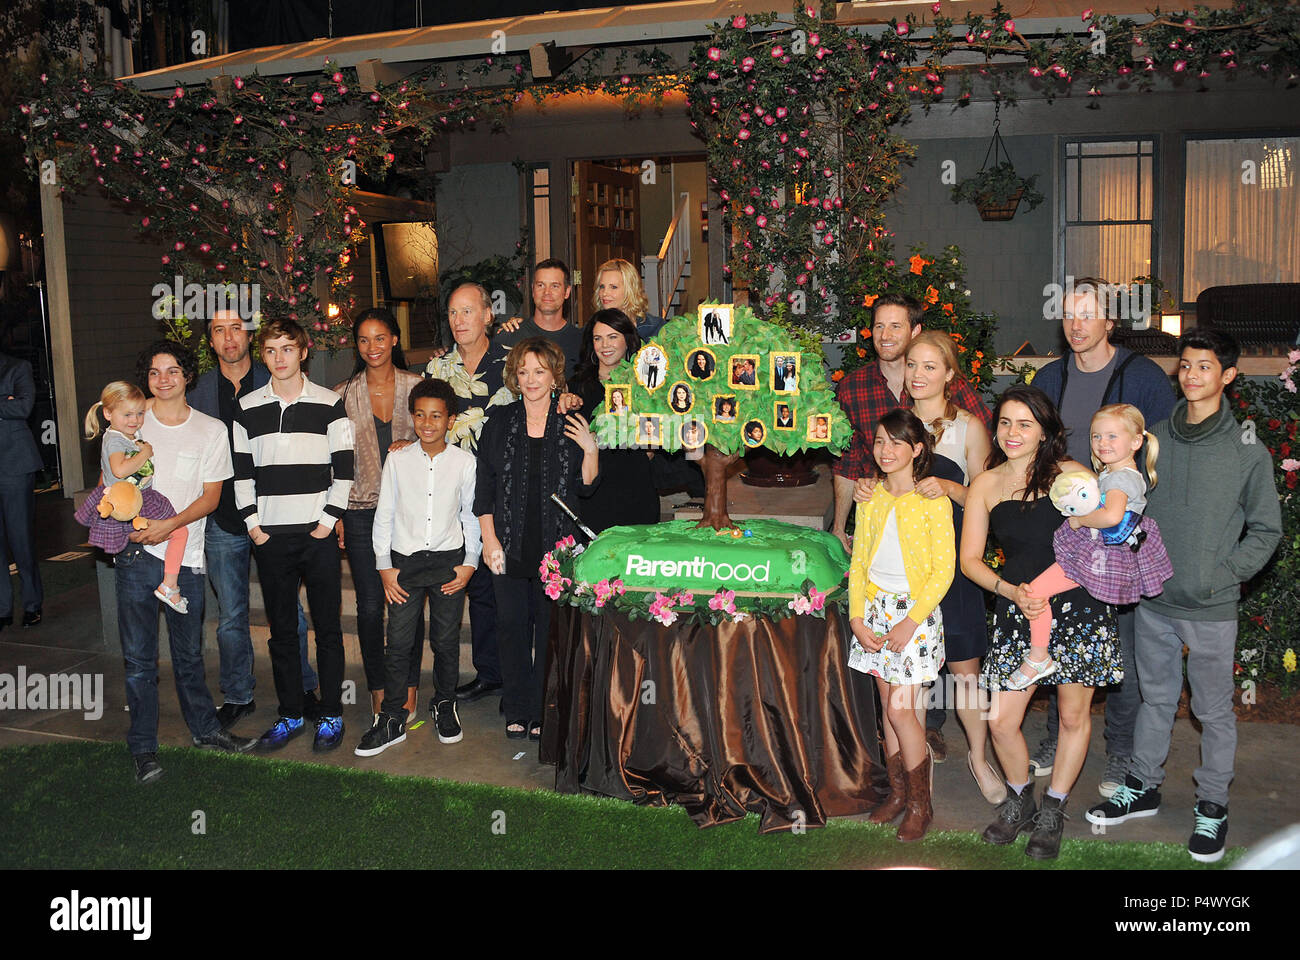 Max Burkholder, Ray Romano, Miles Heizer, Joy Bryant, Tyree Brown, Craig T. Nelson, Bonnie Bedelia, Lauren Graham, Peter Krause, Monica Potter, Sam Jaeger, Erika Christensen, Mae Whitman, Savannah Paige Rae, Dax Shepard and Xolo Mariduena   at ParentHood 100th Episode at the Universal Lot Stage 43 on Nov. 7, 2014 in Los Angeles.Max Burkholder, Ray Romano, Miles Heizer, Joy Bryant, Tyree Brown, Craig T. Nelson, Bonnie Bedelia, Lauren Graham, Peter Krause, Monica Potter, Sam Jaeger, Erika Christensen, Mae Whitman, Savannah Paige Rae, Dax Shepard and Xolo Mariduena 158  Event in Hollywood Life -  Stock Photo